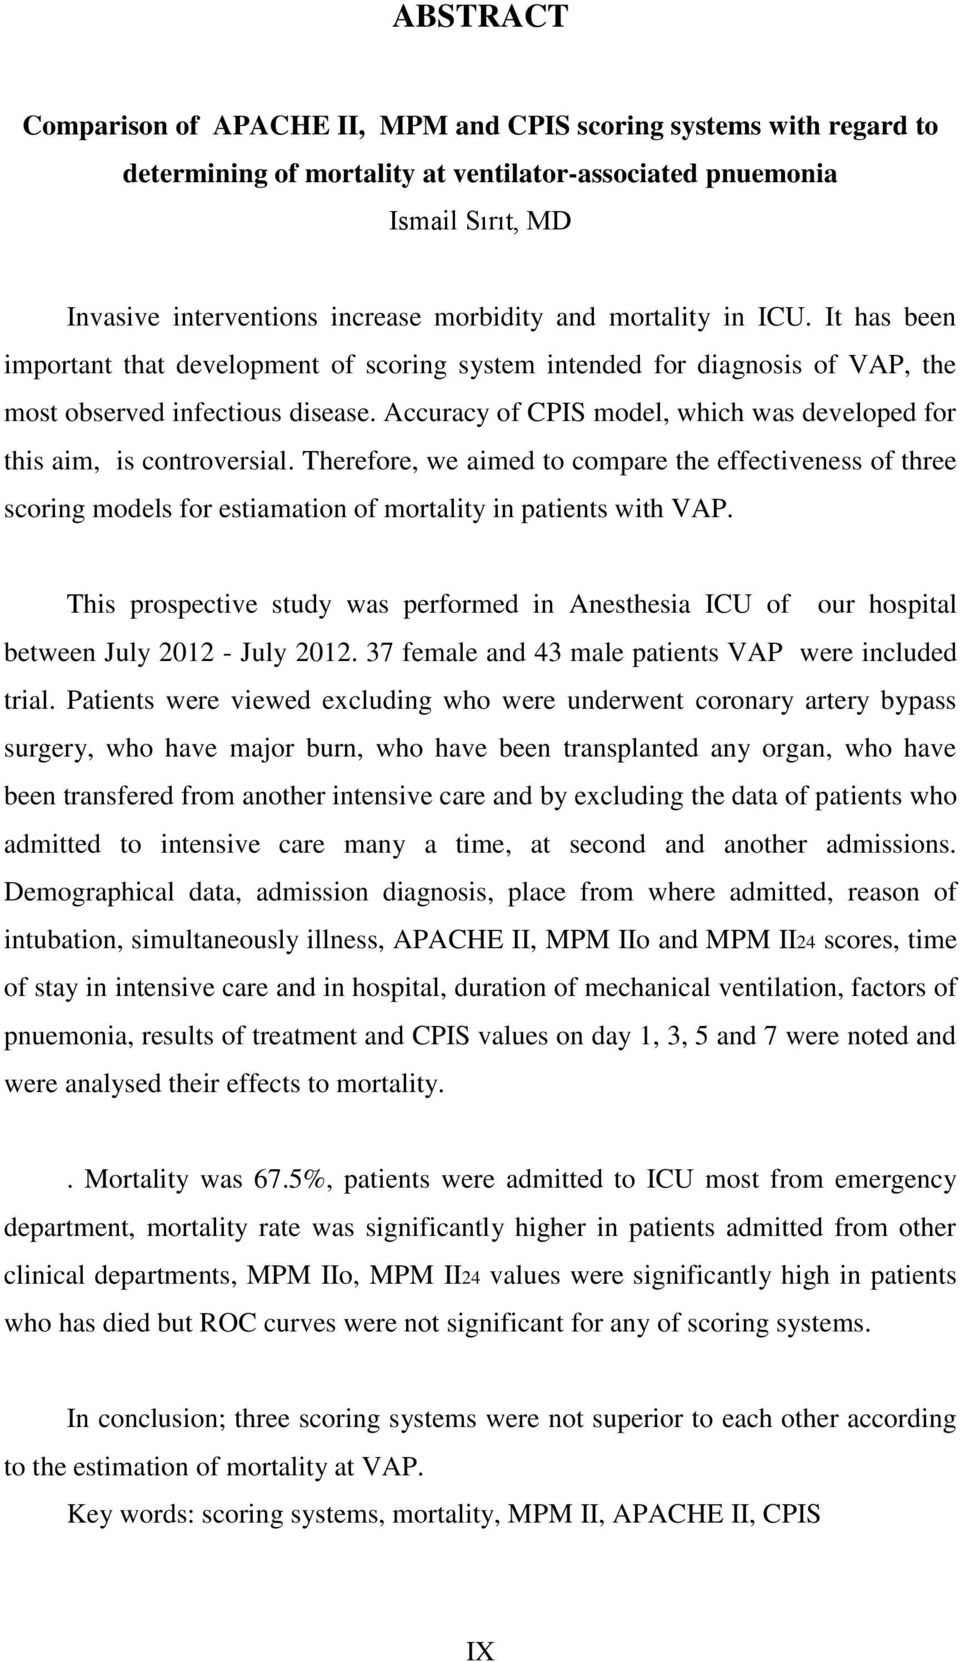 Accuracy of CPIS model, which was developed for this aim, is controversial. Therefore, we aimed to compare the effectiveness of three scoring models for estiamation of mortality in patients with VAP.